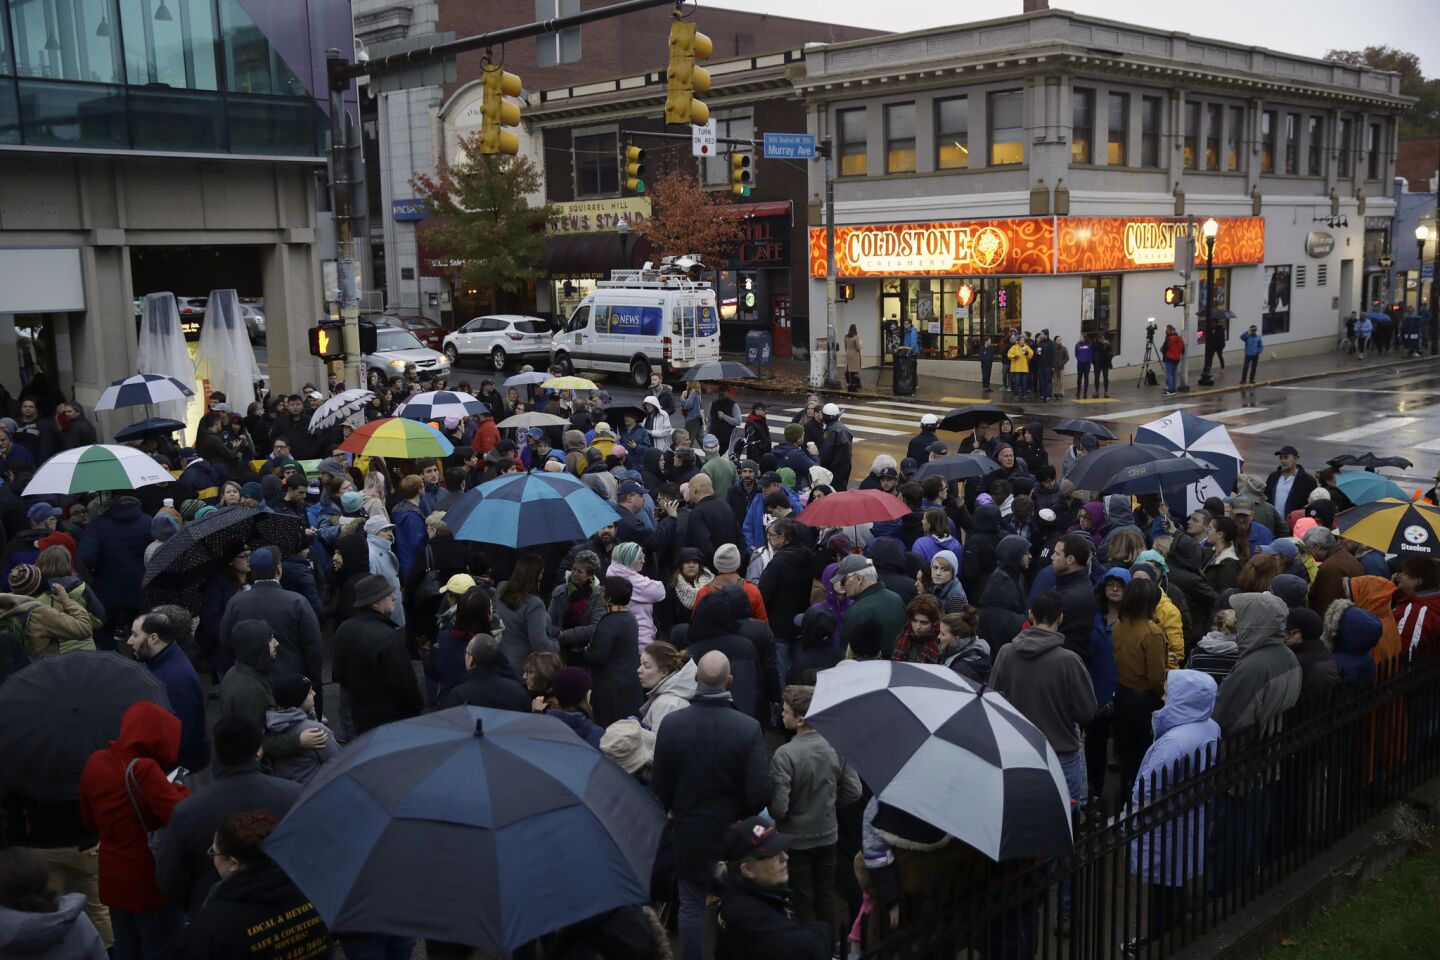 People gather for a vigil in the aftermath of a deadly shooting at the Tree of Life synagogue in the Squirrel Hill neighborhood of Pittsburgh on Oct. 27, 2018.